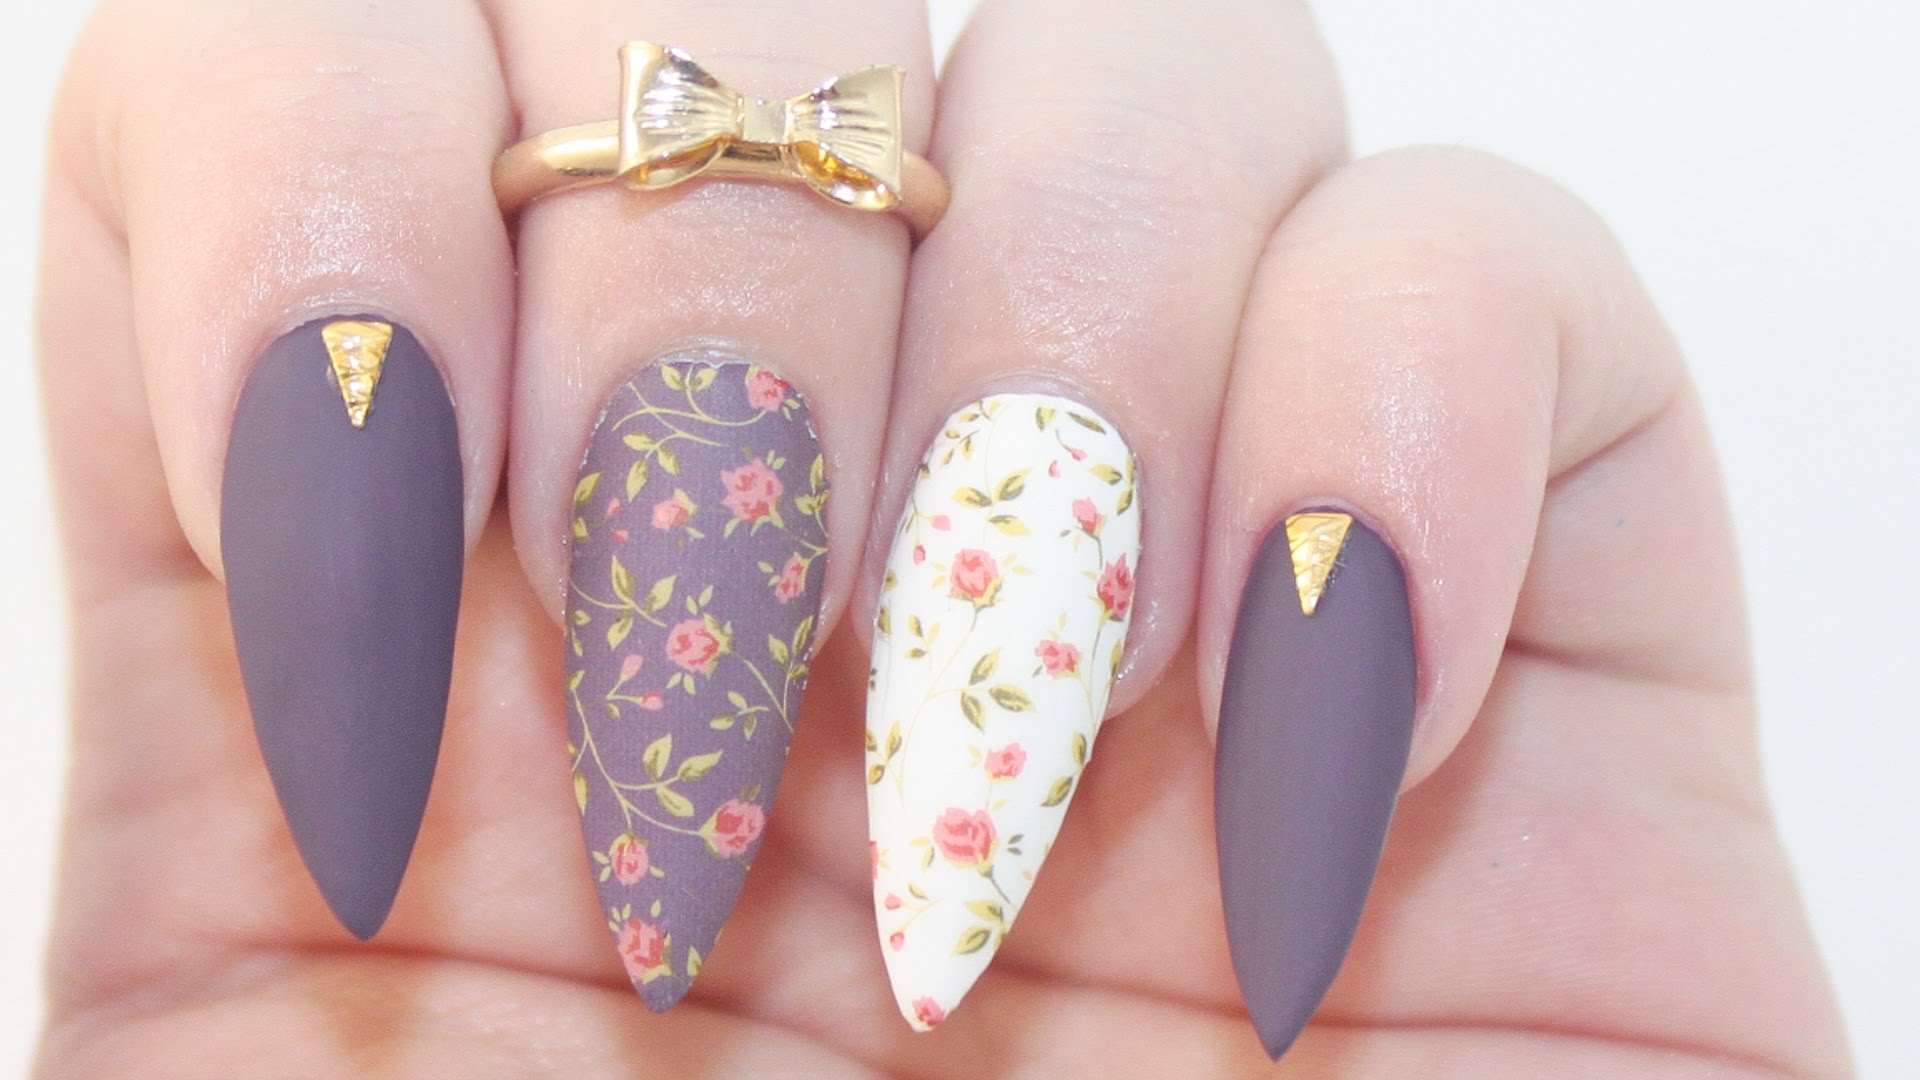 45 Charming Matte Nail Designs To Try This Fall; Nail designs fall; matte nails for long or short nails; acrylic matte nails; coffin matte nails; round matte nails; ombre matte nails.